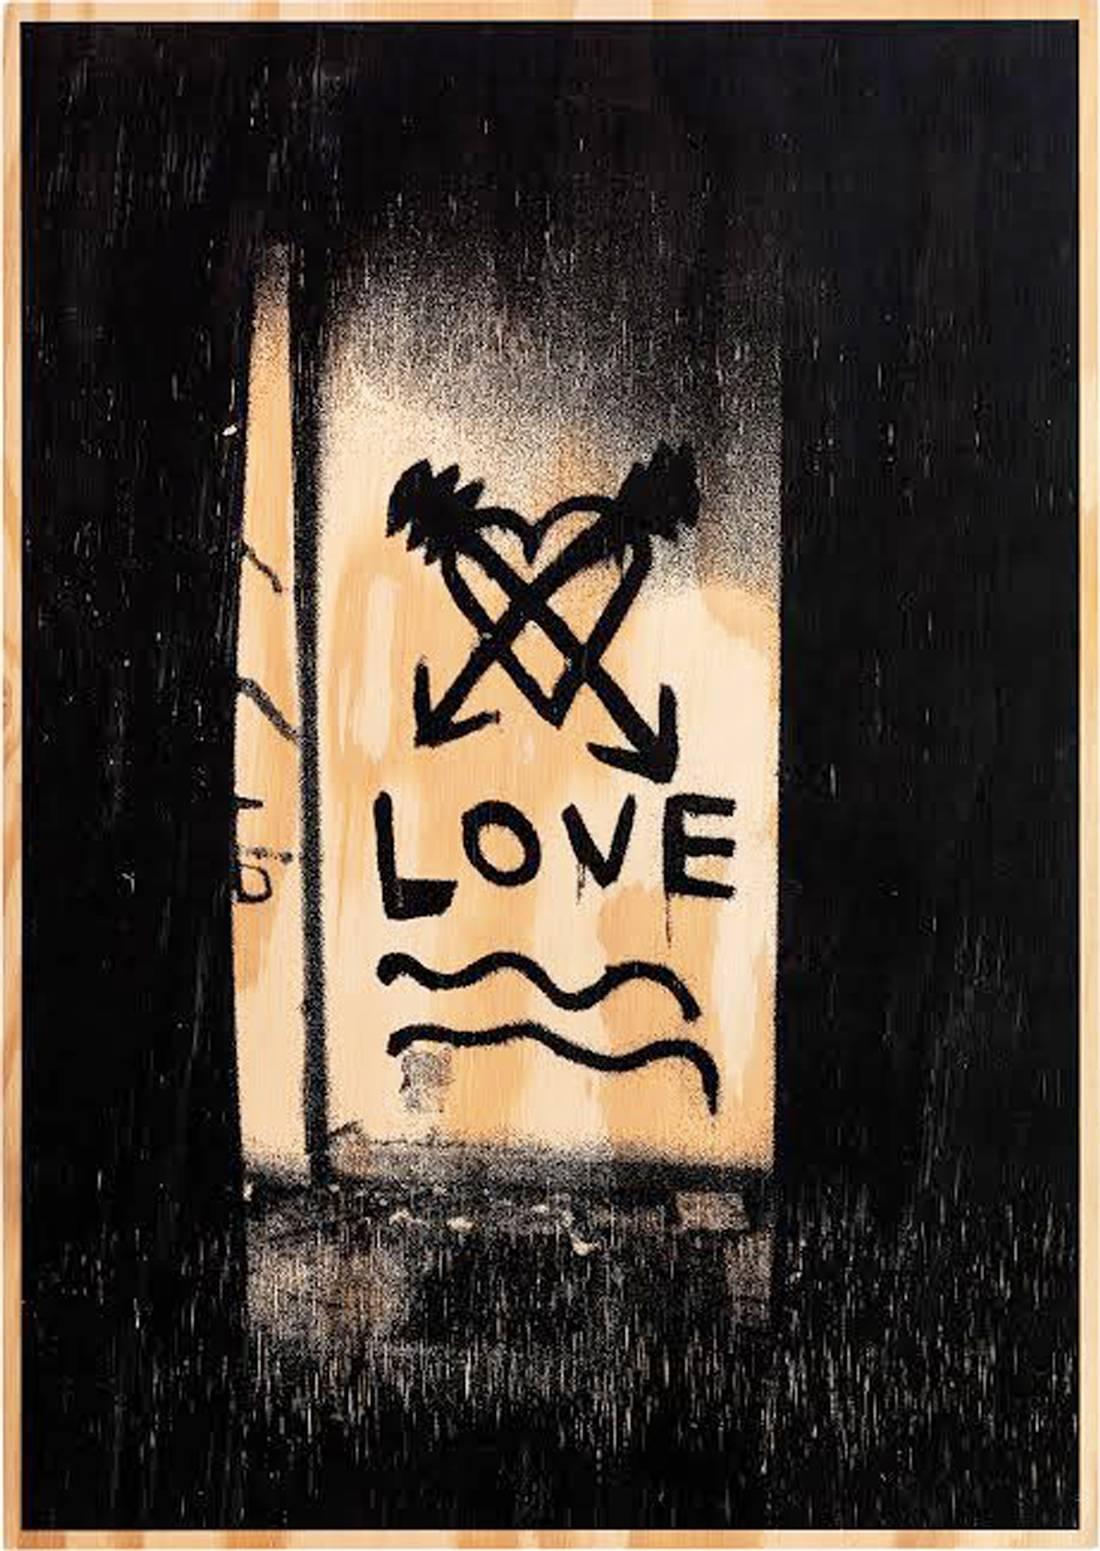 Stephan Balkenhol (born 1957 in Fritzlar)
LOVE, 2001
Medium: Screenprint on wood
Dimensions: 42 x 30 cm
Edition of 50: Hand signed, numbered and dated on the reverse

“I’m perhaps proposing a story and not telling the end, just giving a beginning or